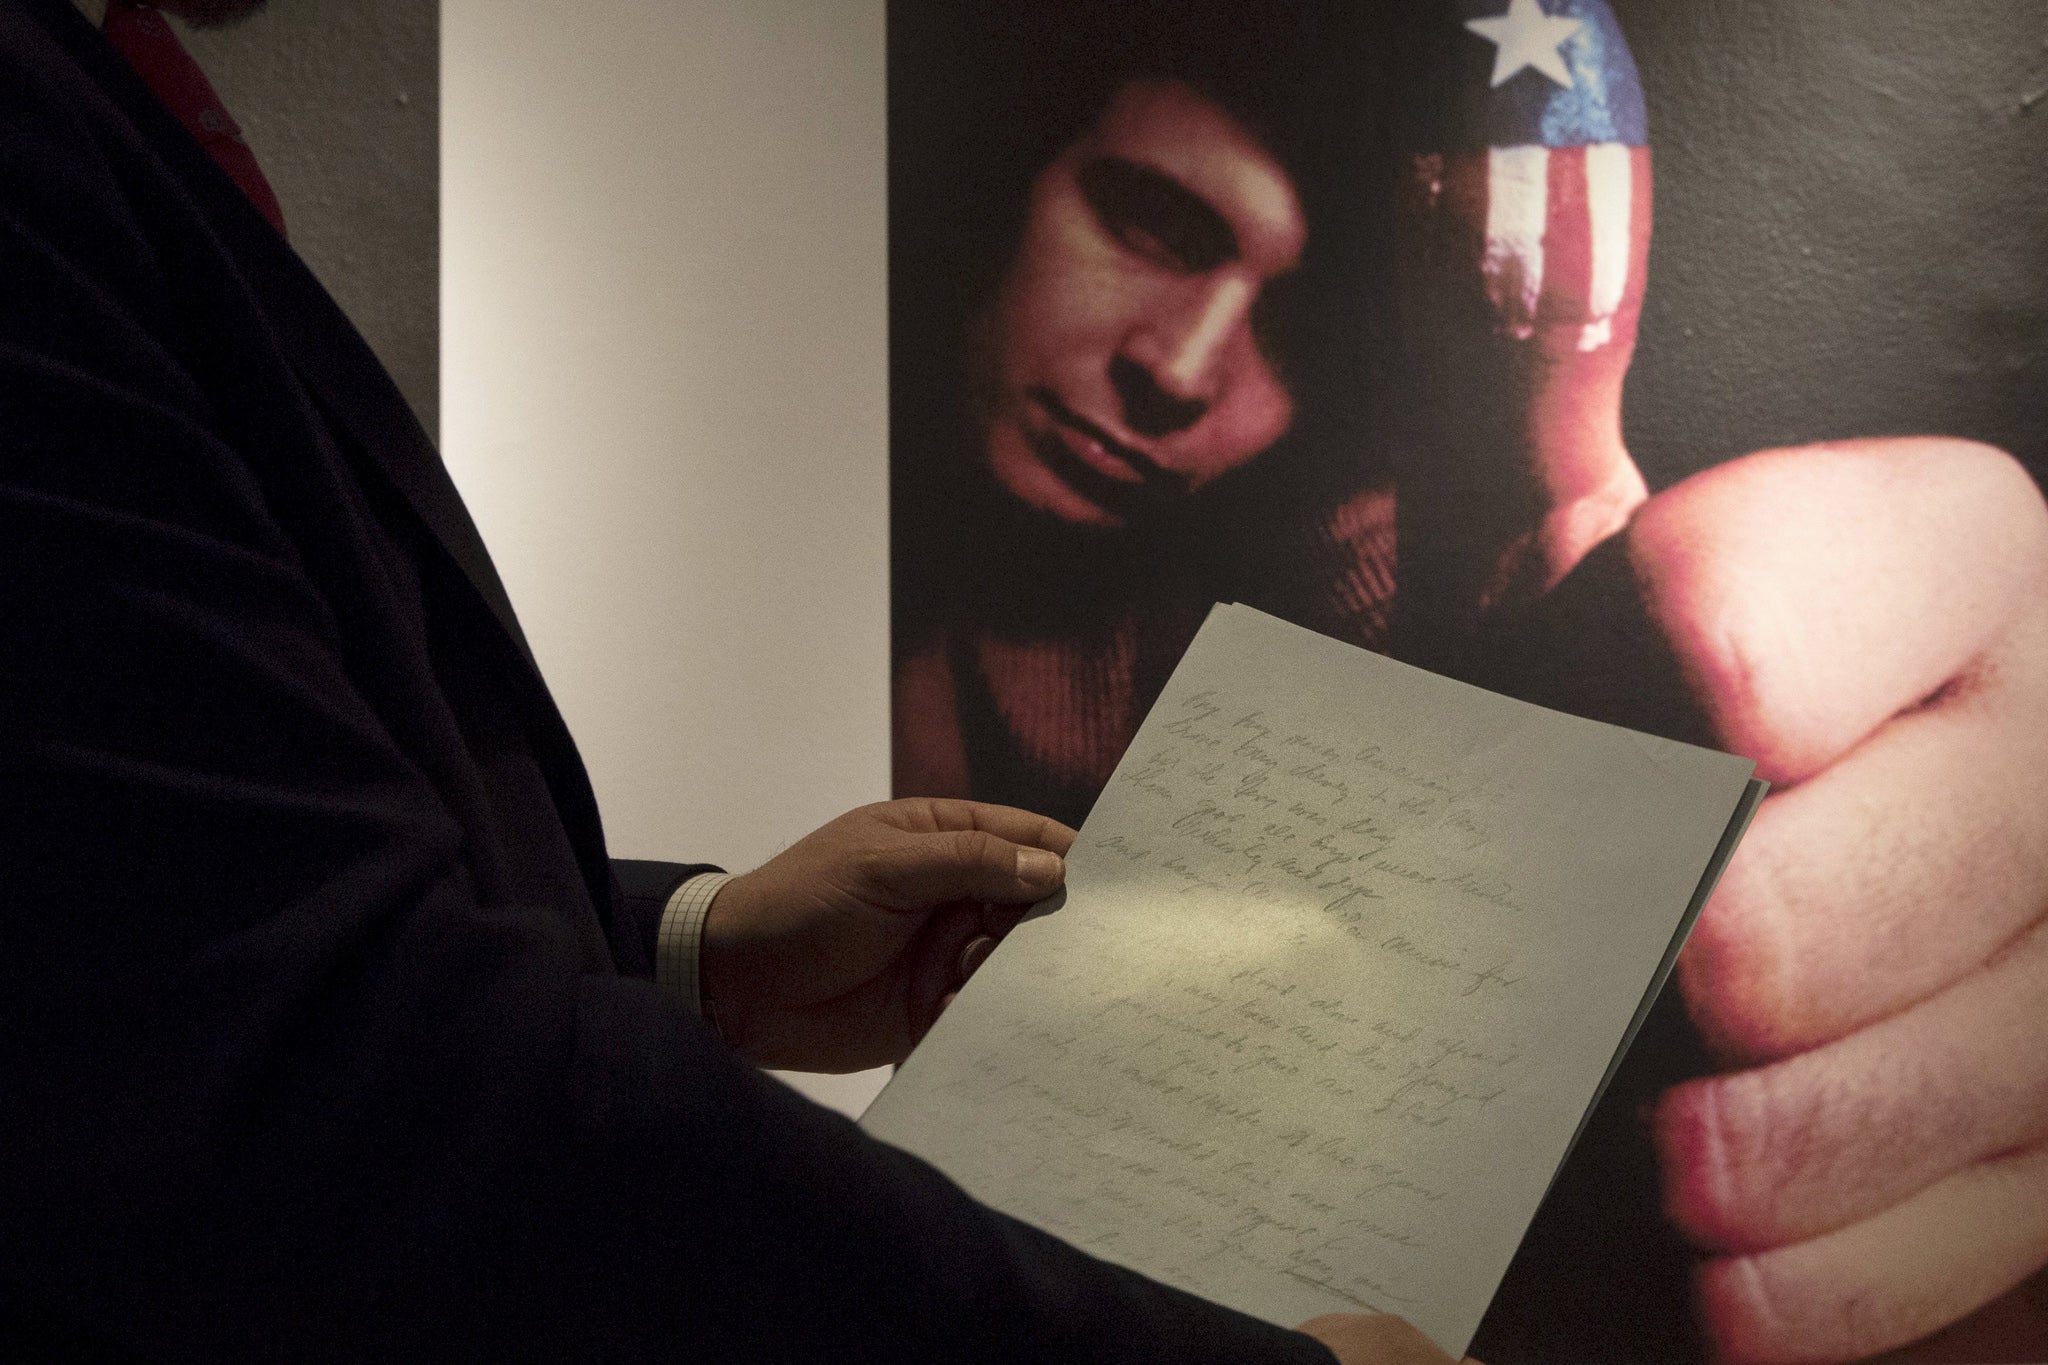 Don McLean's 17 page manuscript for 'American Pie' goes up for auction at Christie's in New York